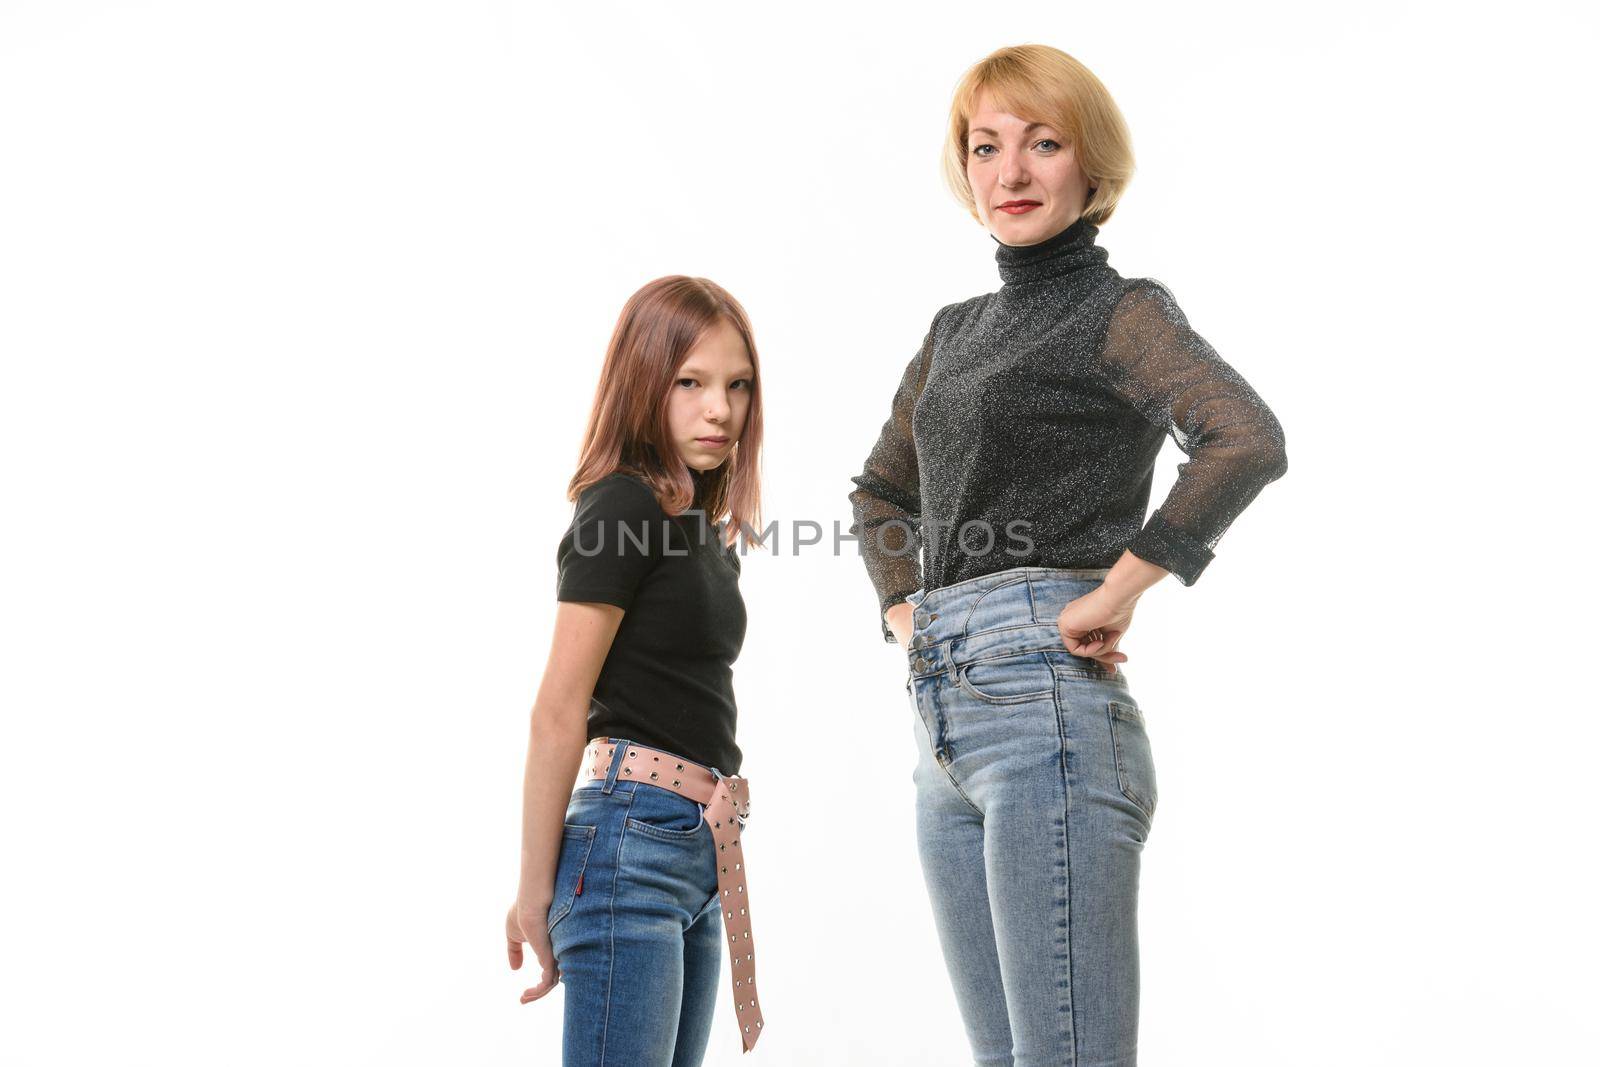 Upset girl and smiling girl look into the frame, isolated on white background a